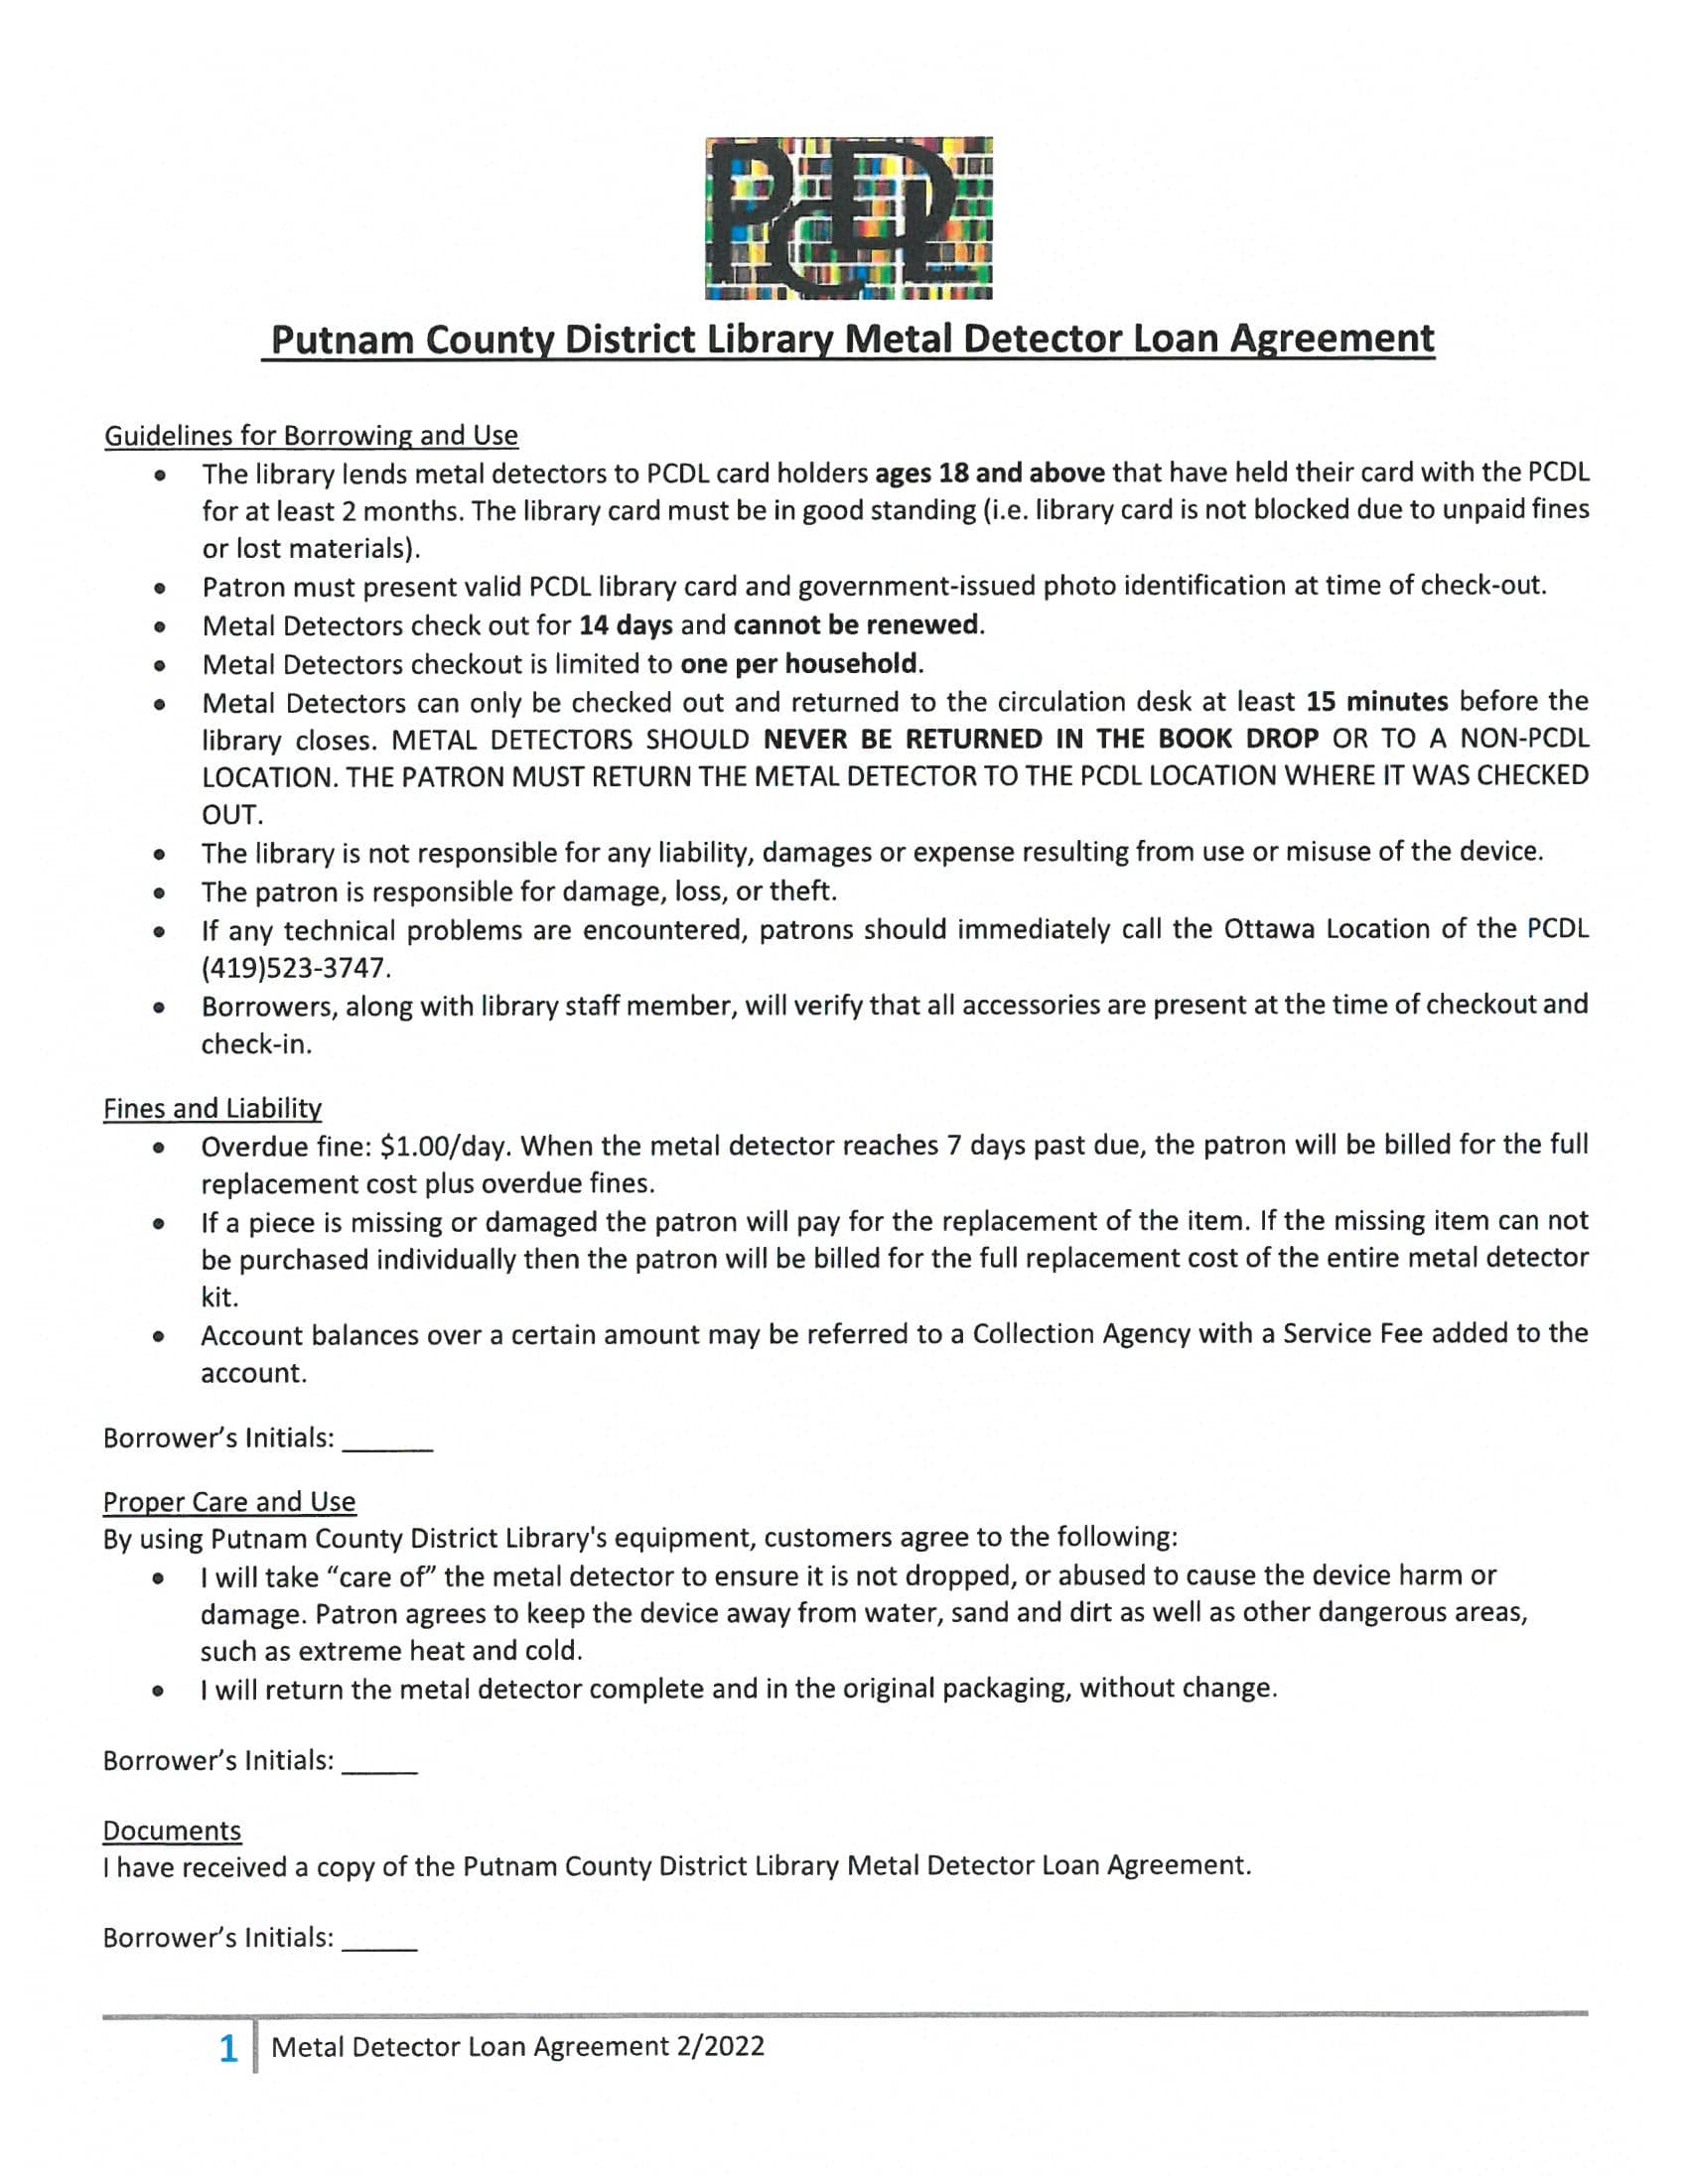 PCDL Metal Detector Loan Agreement page1  call 419-523-3747 ext 3 for more information